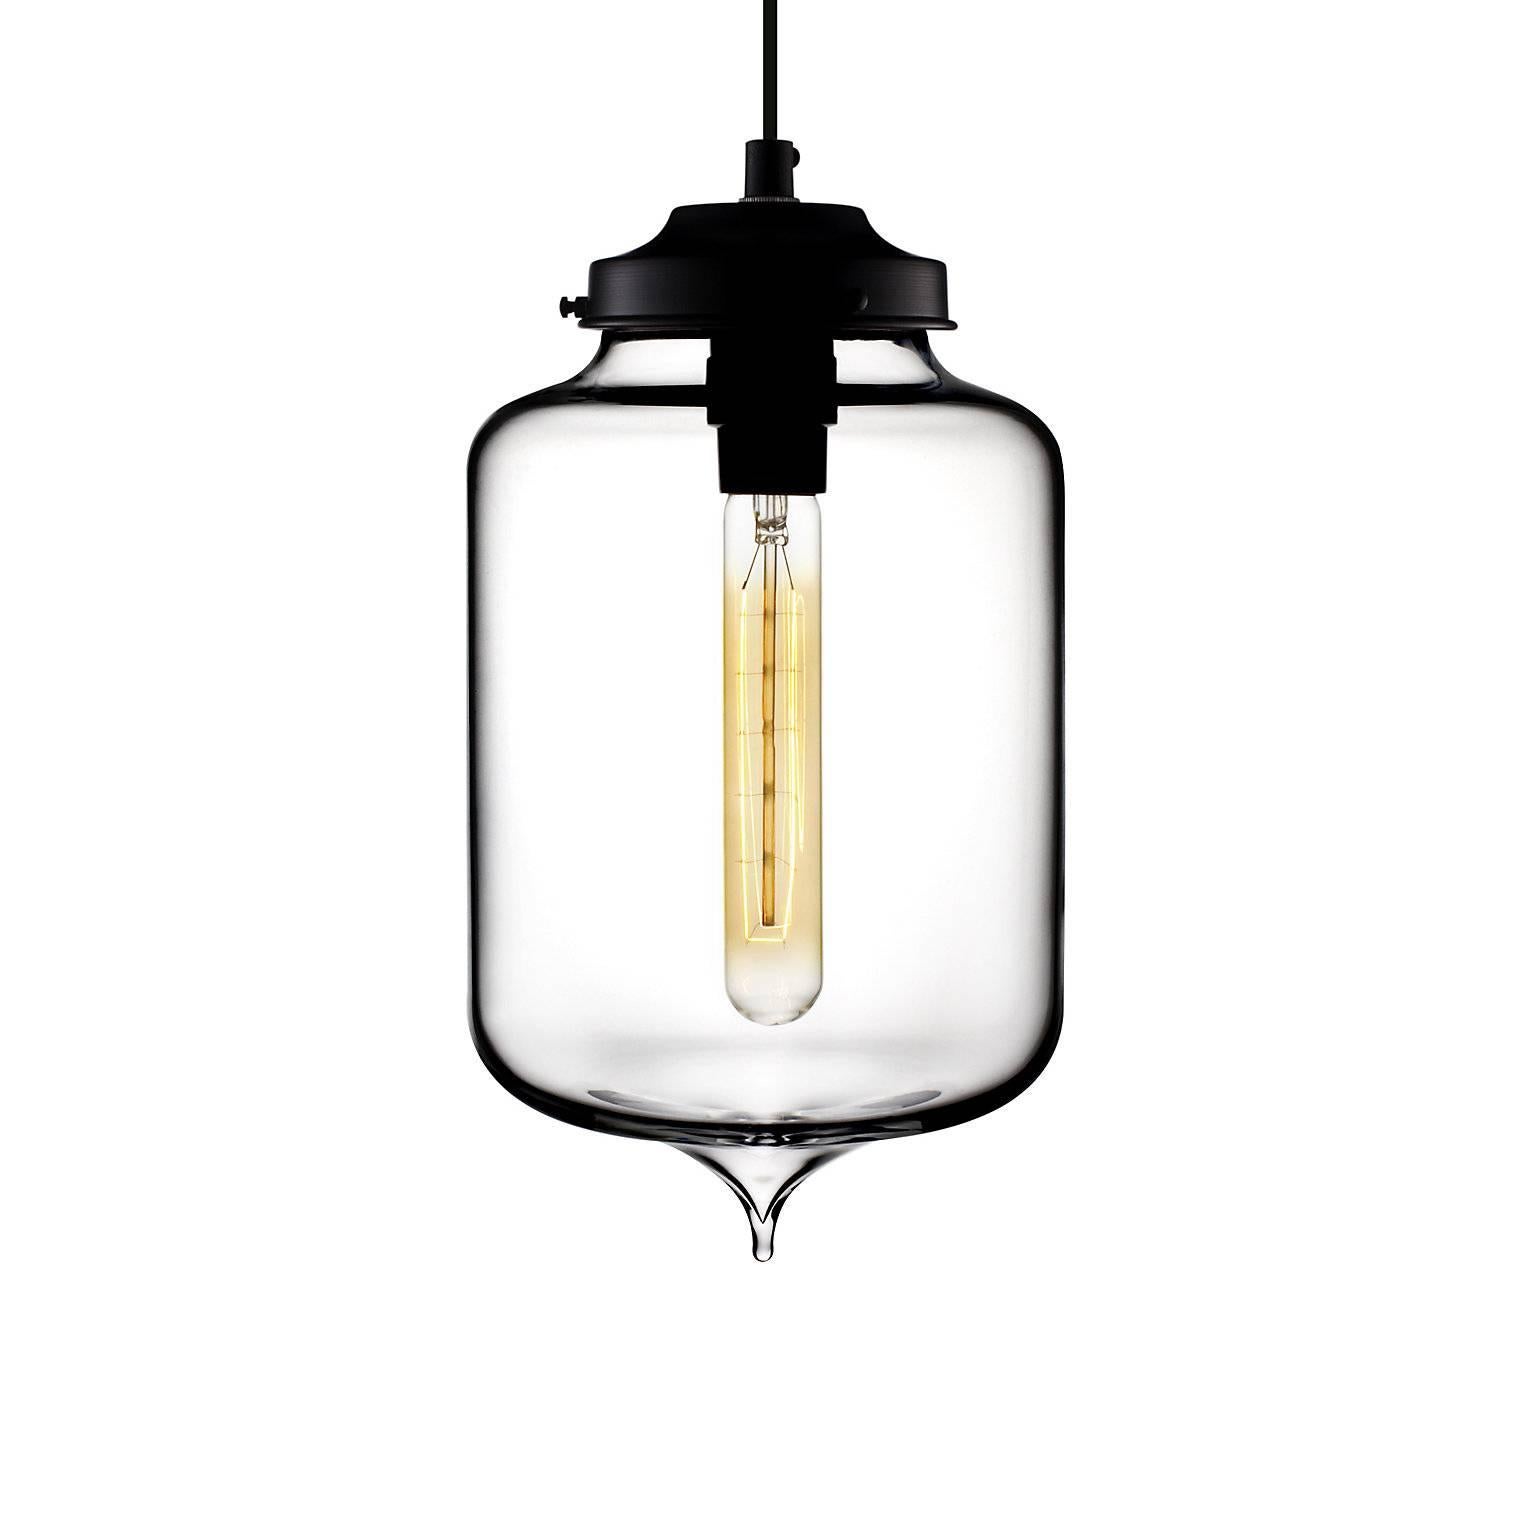 Born from the intricacies of Moorish architecture, the slender Turret and its wider counterpart, the Minaret, feature a hand-pulled tear-drop shape that reflects refined beauty. Every single glass pendant light that comes from Niche is hand-blown by